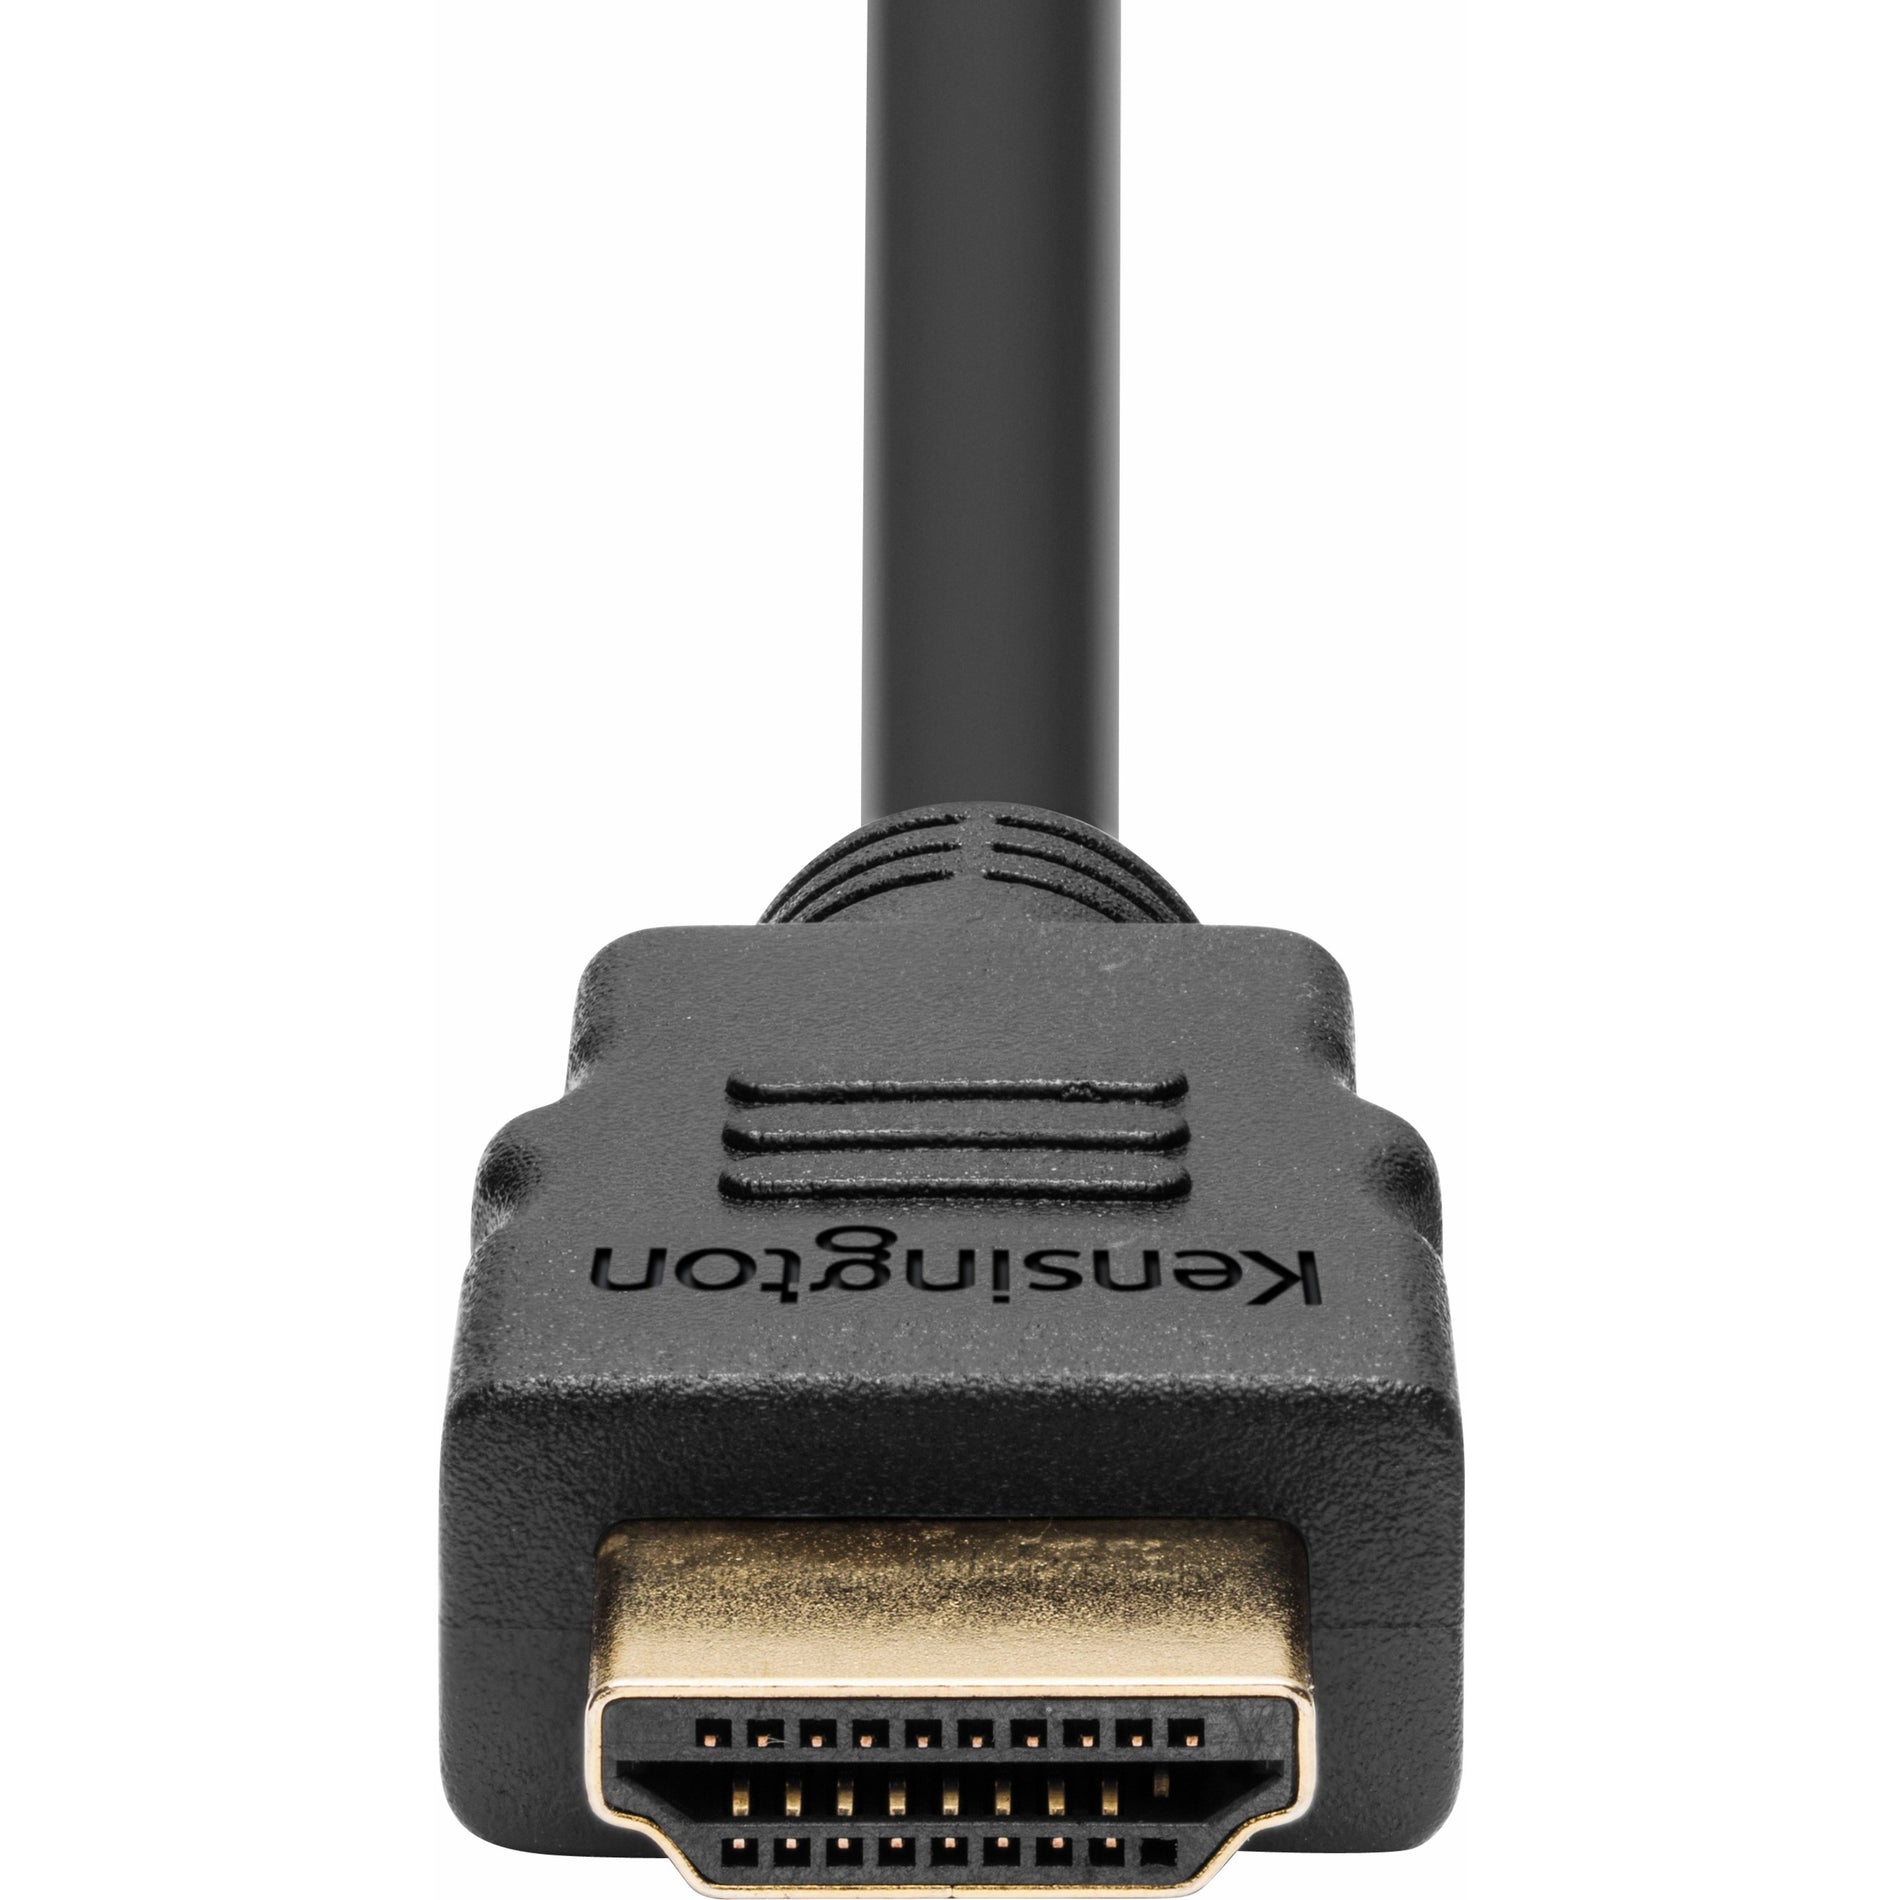 Kensington K33020WW High Speed HDMI Cable With Ethernet, 6ft, 18 Gbit/s, 4K Resolution